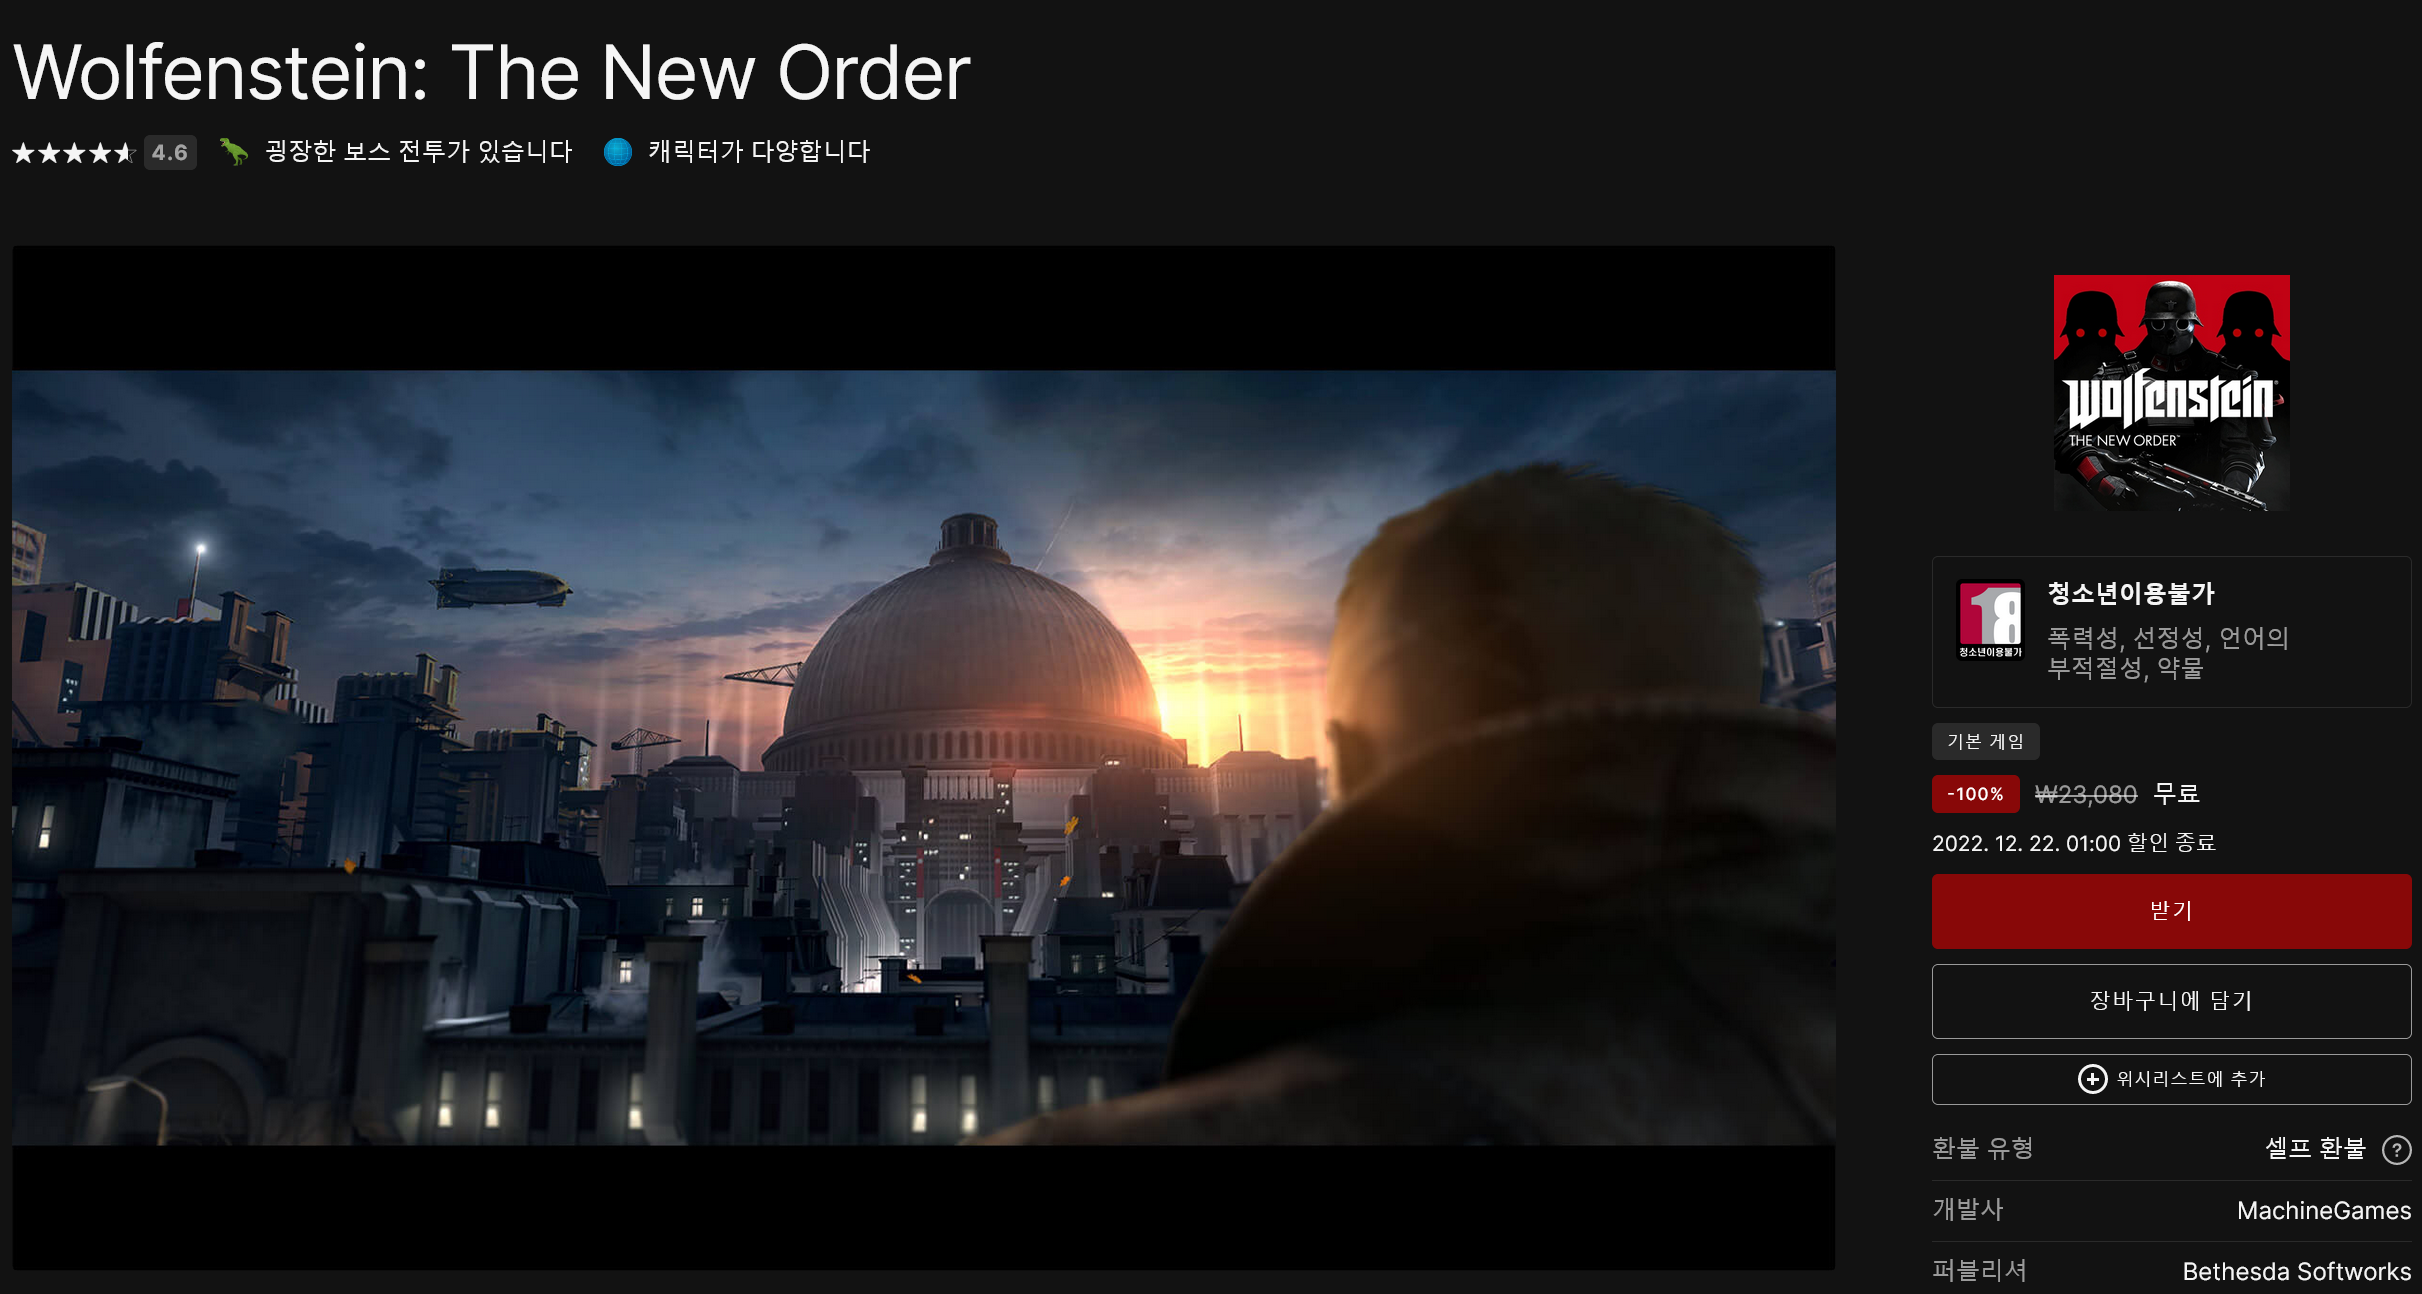 Screenshot 2022-12-21 at 07-19-46 Wolfenstein The New Order.png